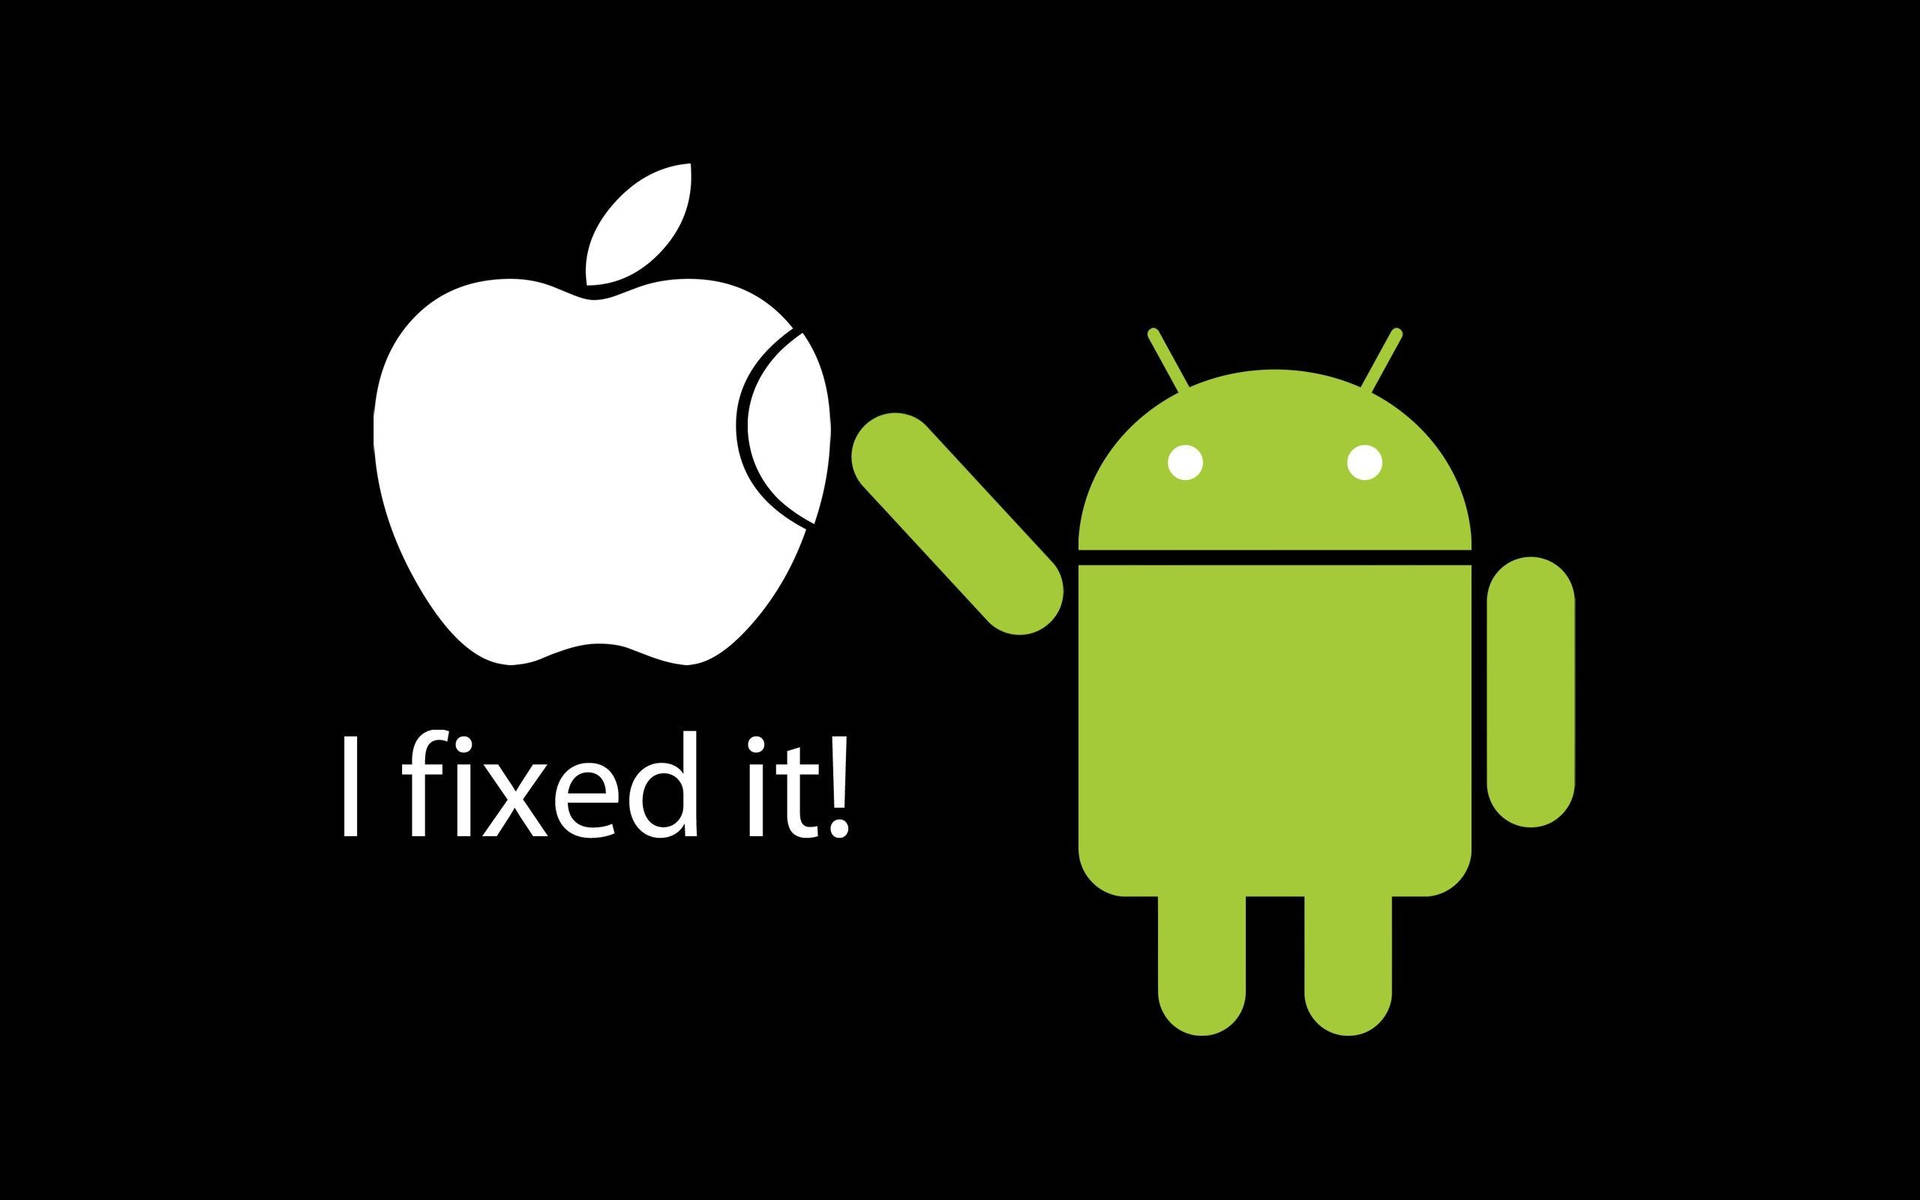 Funny Android And Apple Fan Art Background